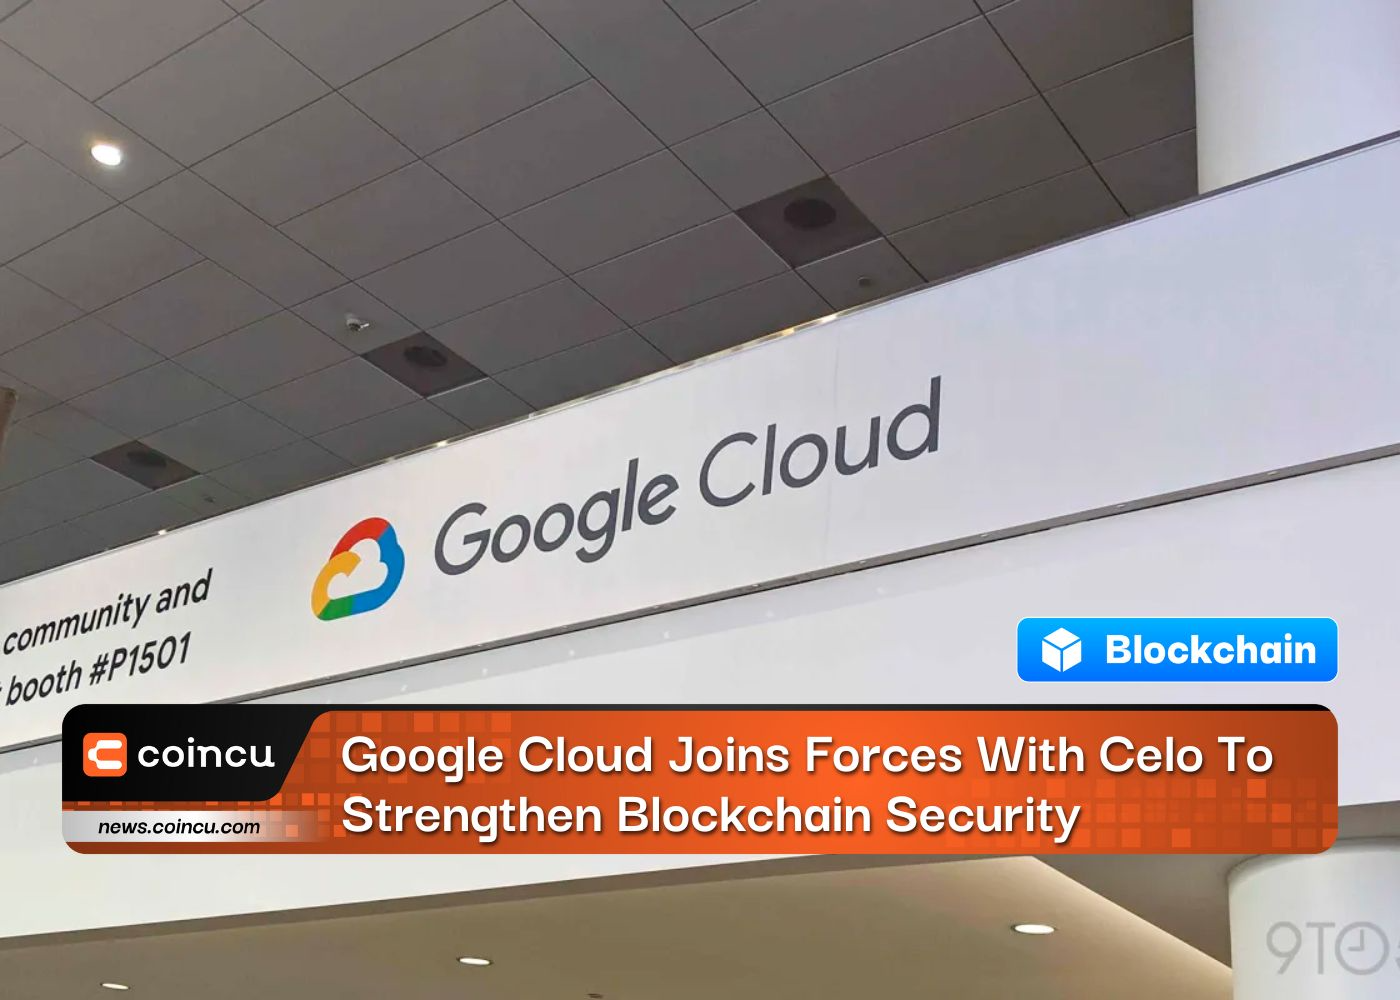 Google Cloud Joins Forces With Celo To Strengthen Blockchain Security